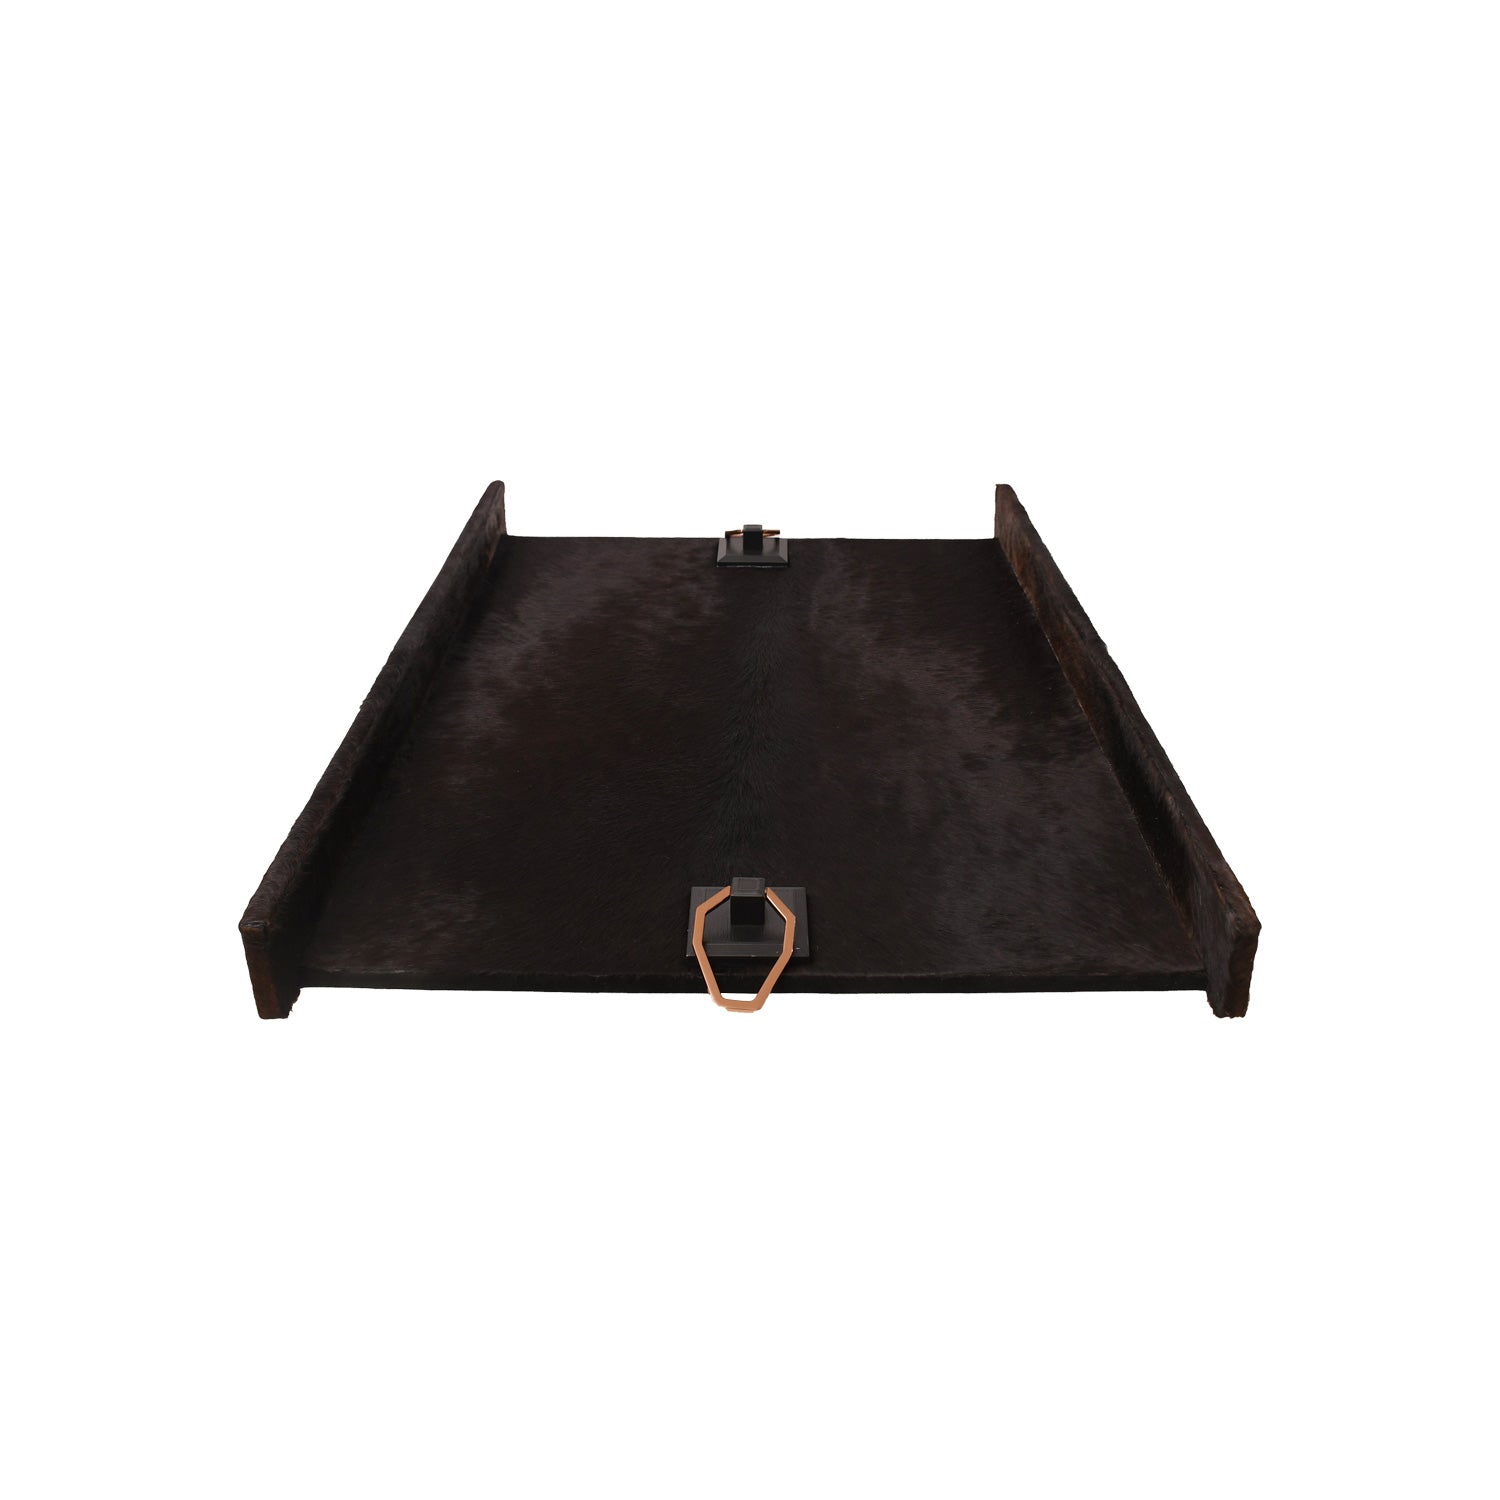 Brown Natural Hair-On Leather Tray Side